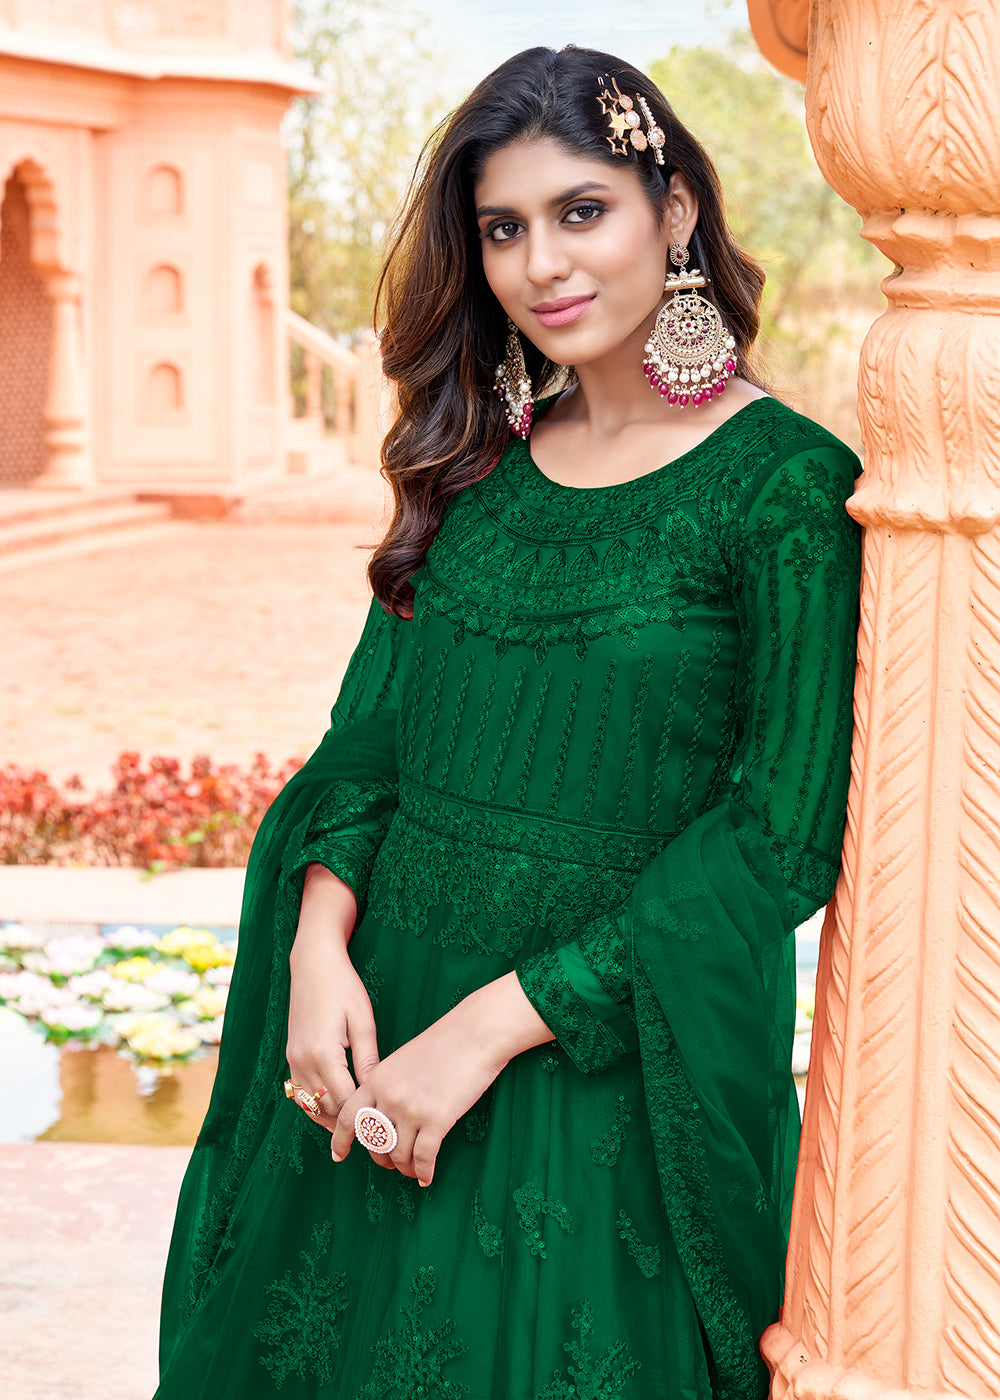 Buy Now Long Length Dark Green Embroidered Net Anarkali Suit Online in USA, UK, Australia, New Zealand, Canada, Italy & Worldwide at Empress Clothing.